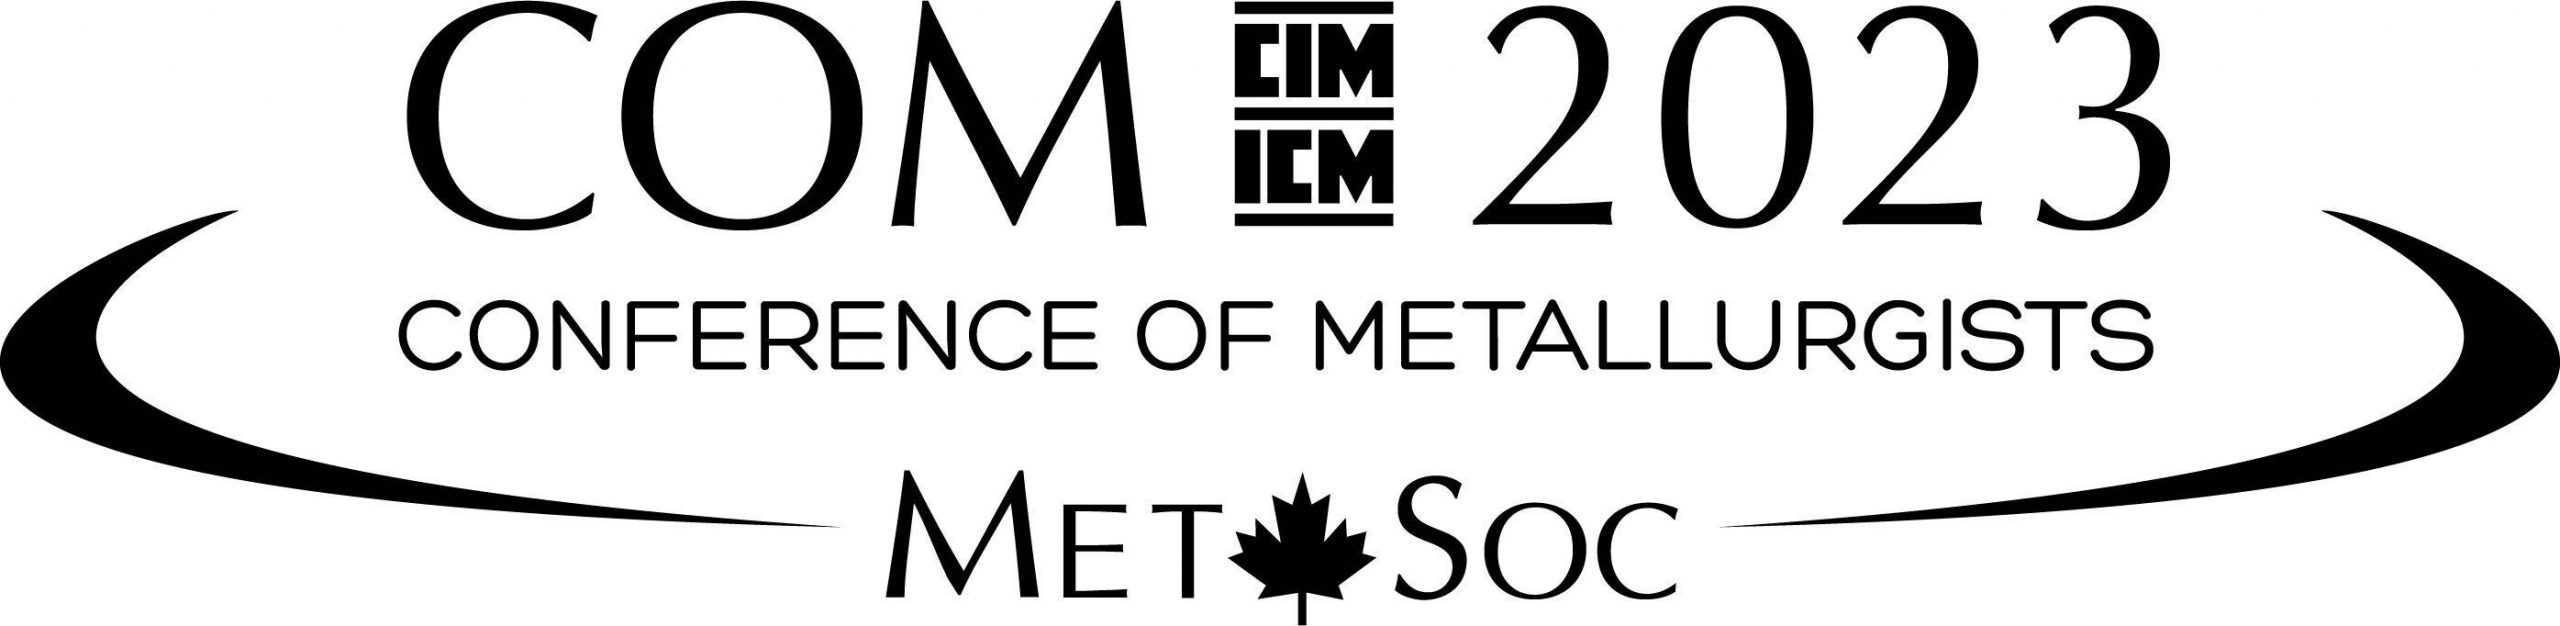 COM 2023 Conference of Metallurgists Knight Materials